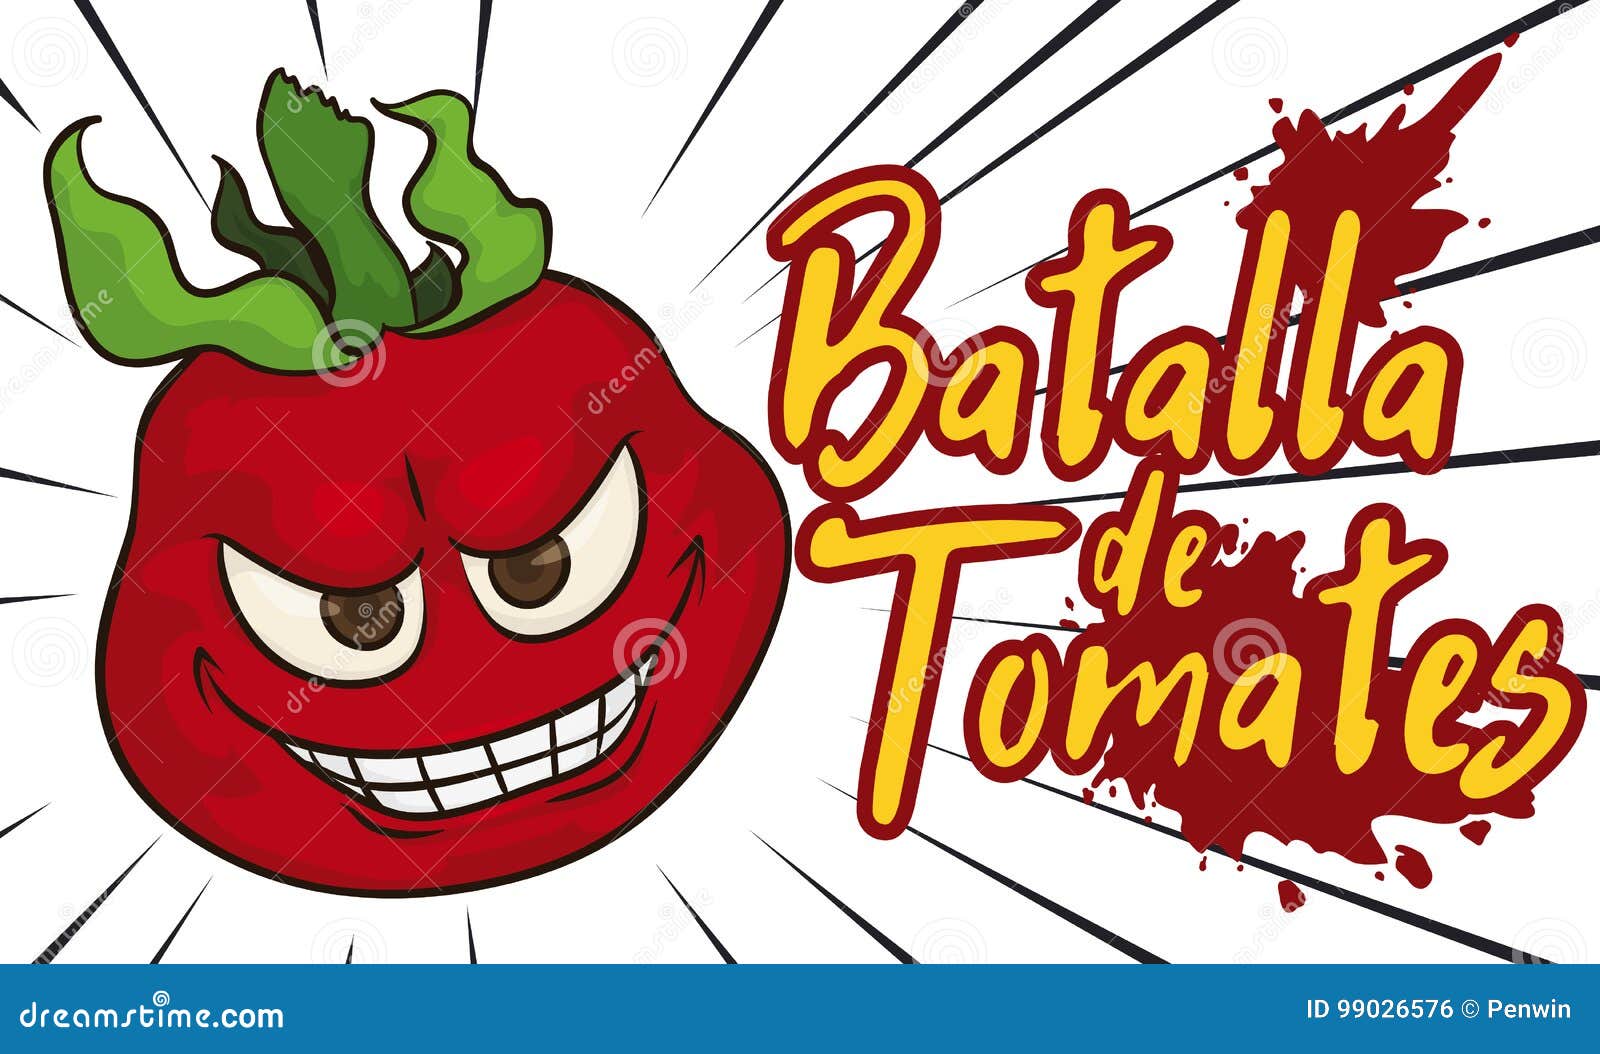 furious tomato crossing at full speed in battle of tomatoes,  